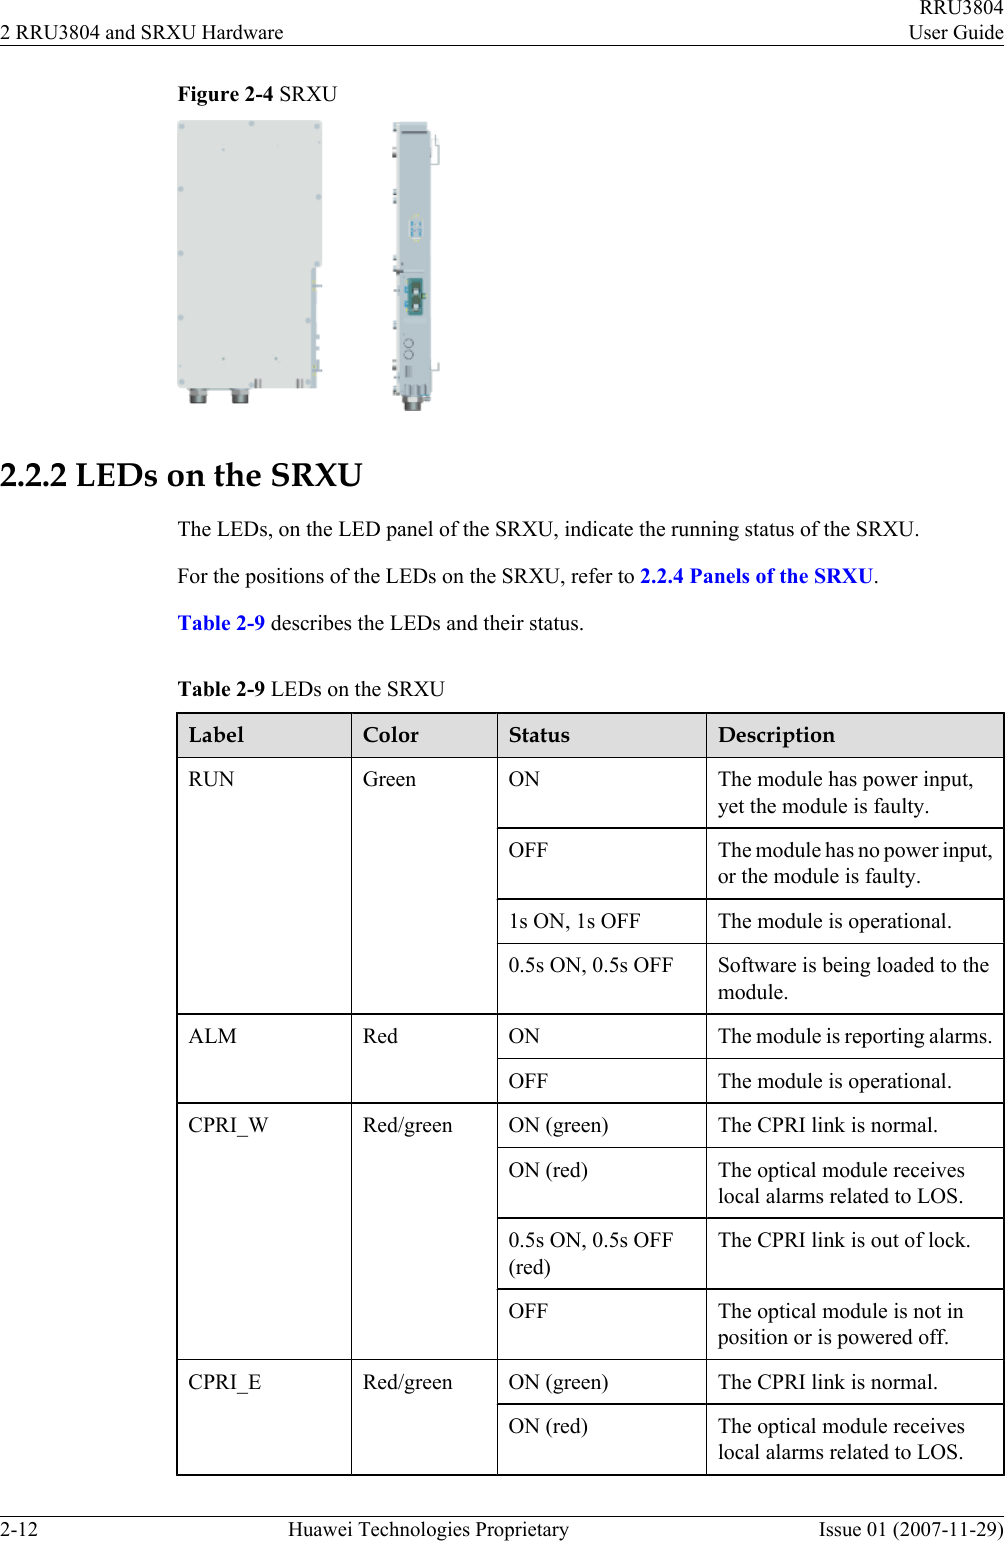 Figure 2-4 SRXU2.2.2 LEDs on the SRXUThe LEDs, on the LED panel of the SRXU, indicate the running status of the SRXU.For the positions of the LEDs on the SRXU, refer to 2.2.4 Panels of the SRXU.Table 2-9 describes the LEDs and their status.Table 2-9 LEDs on the SRXULabel Color Status DescriptionRUN Green ON The module has power input,yet the module is faulty.OFF The module has no power input,or the module is faulty.1s ON, 1s OFF The module is operational.0.5s ON, 0.5s OFF Software is being loaded to themodule.ALM Red ON The module is reporting alarms.OFF The module is operational.CPRI_W Red/green ON (green) The CPRI link is normal.ON (red) The optical module receiveslocal alarms related to LOS.0.5s ON, 0.5s OFF(red)The CPRI link is out of lock.OFF The optical module is not inposition or is powered off.CPRI_E Red/green ON (green) The CPRI link is normal.ON (red) The optical module receiveslocal alarms related to LOS.2 RRU3804 and SRXU HardwareRRU3804User Guide2-12 Huawei Technologies Proprietary Issue 01 (2007-11-29)